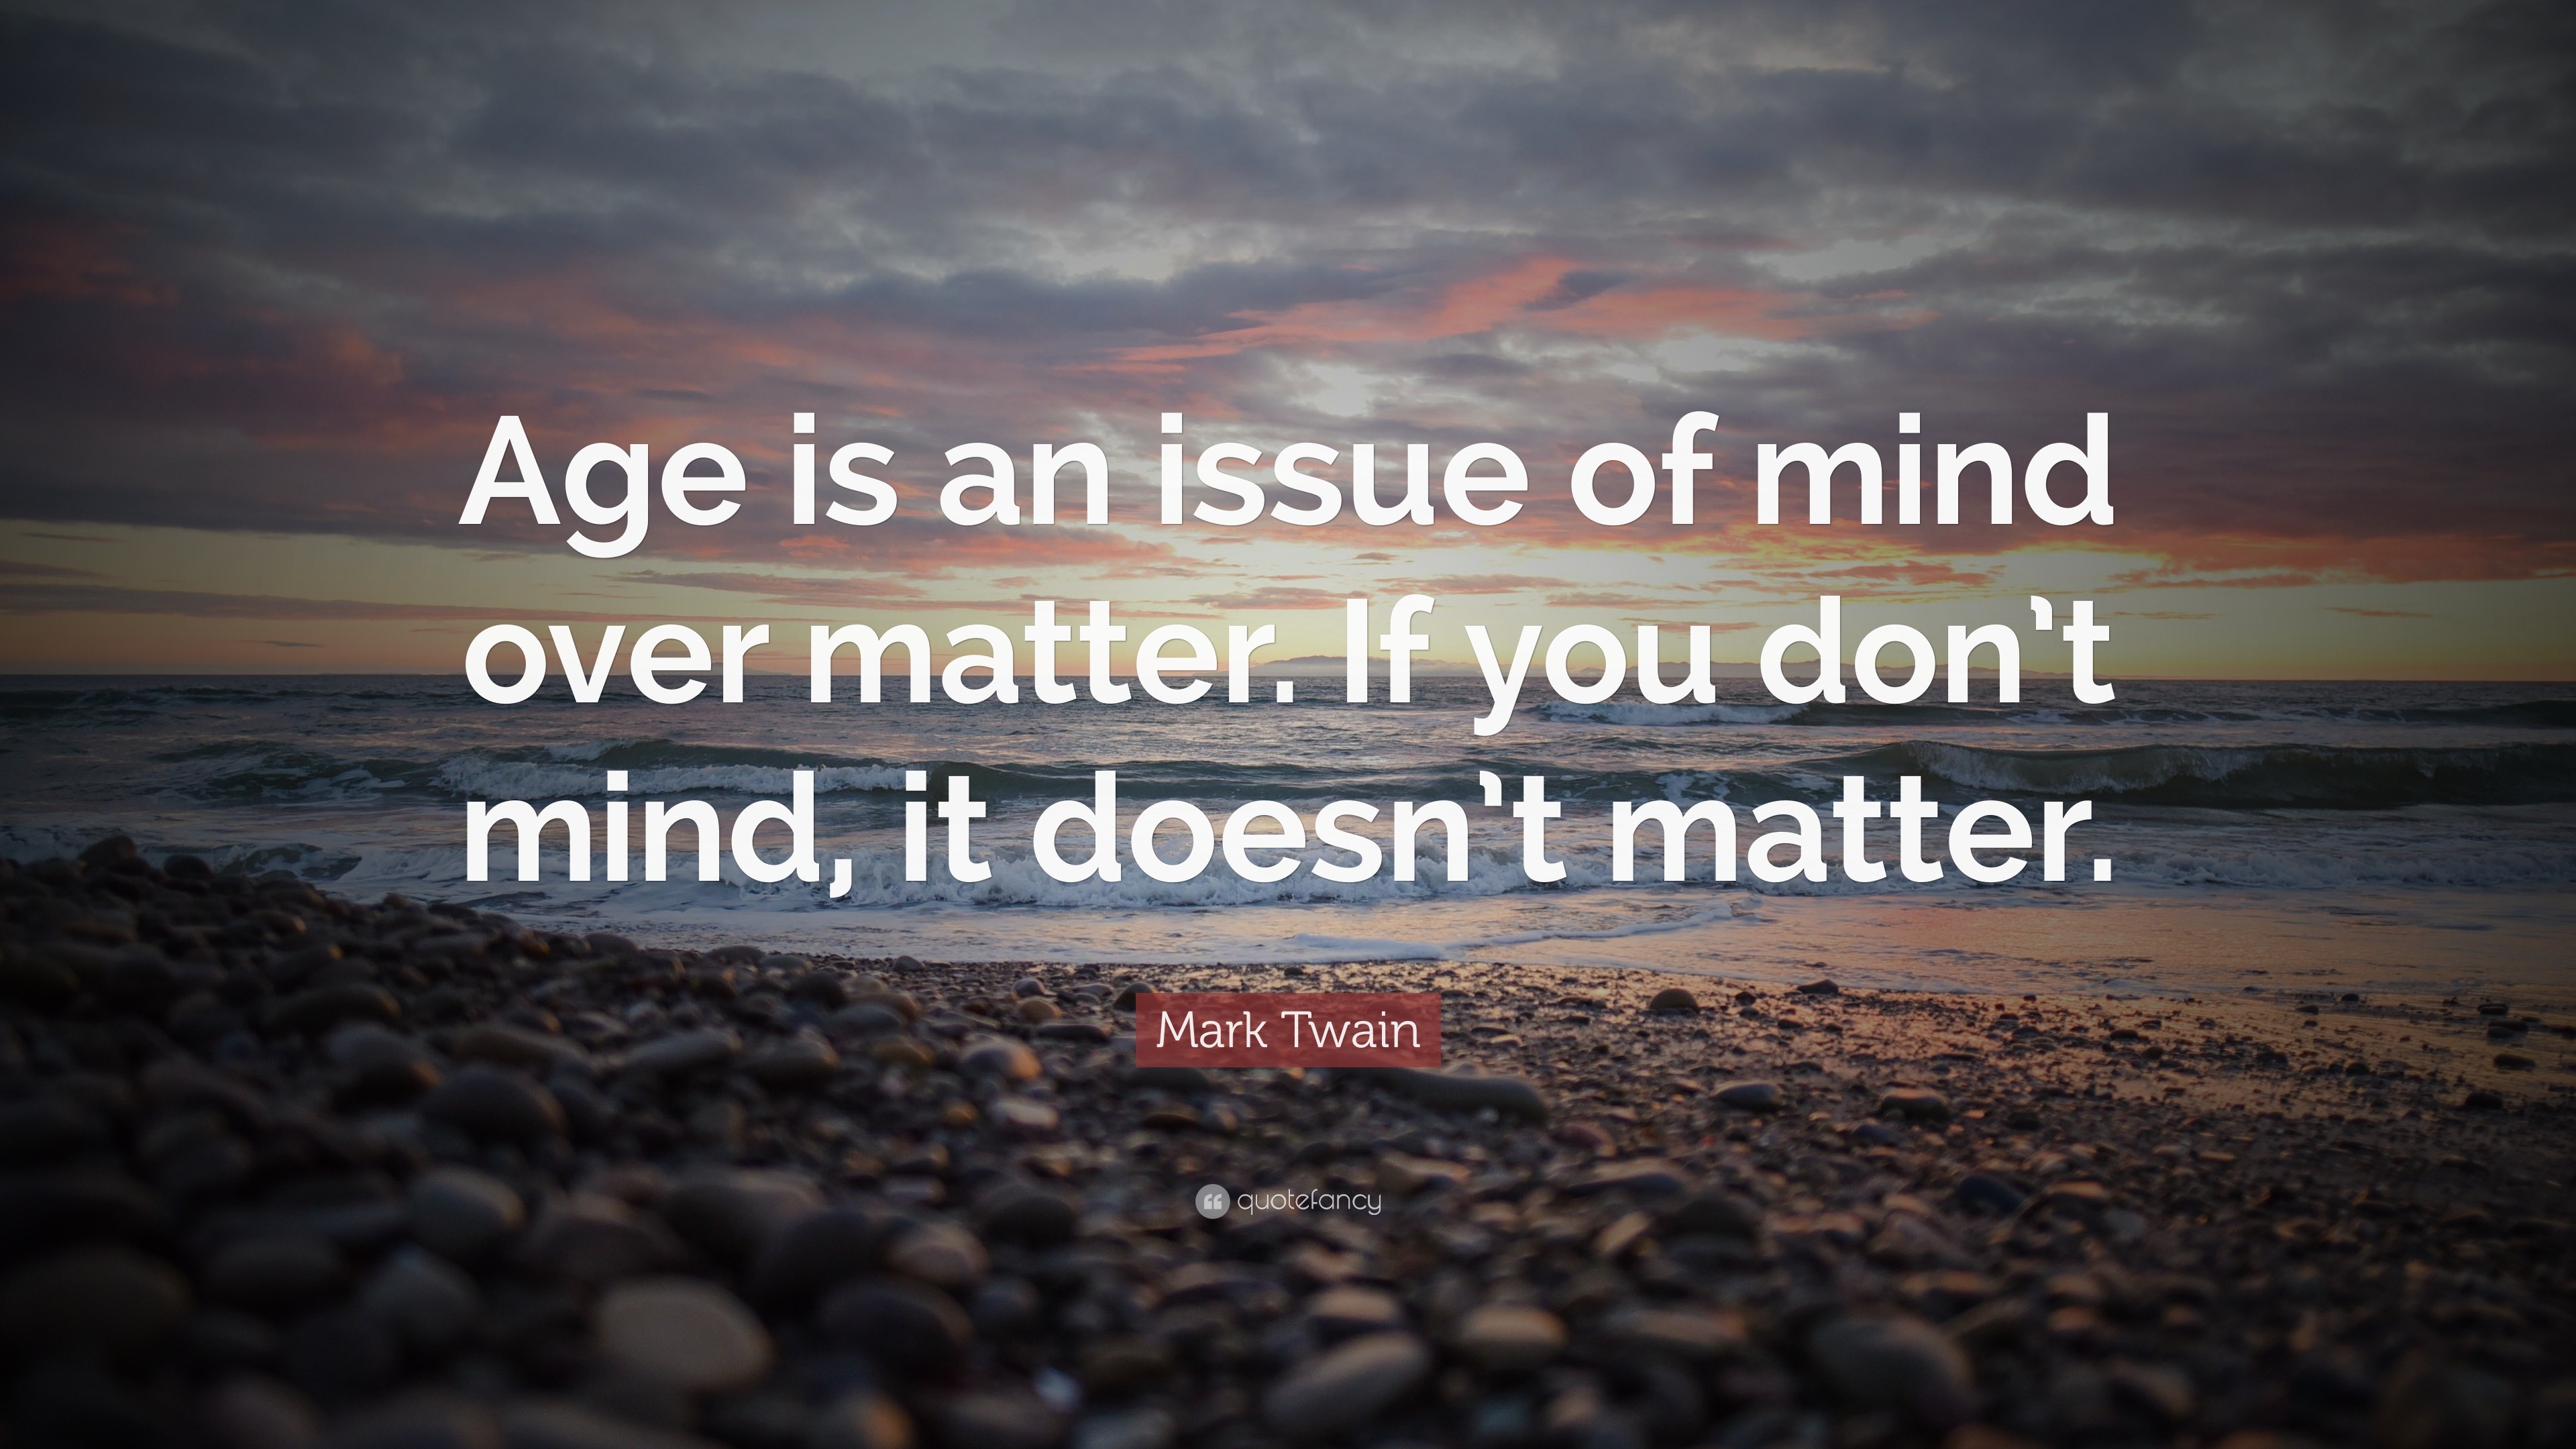 Mark Twain Quote “Age is an issue of mind over matter. If